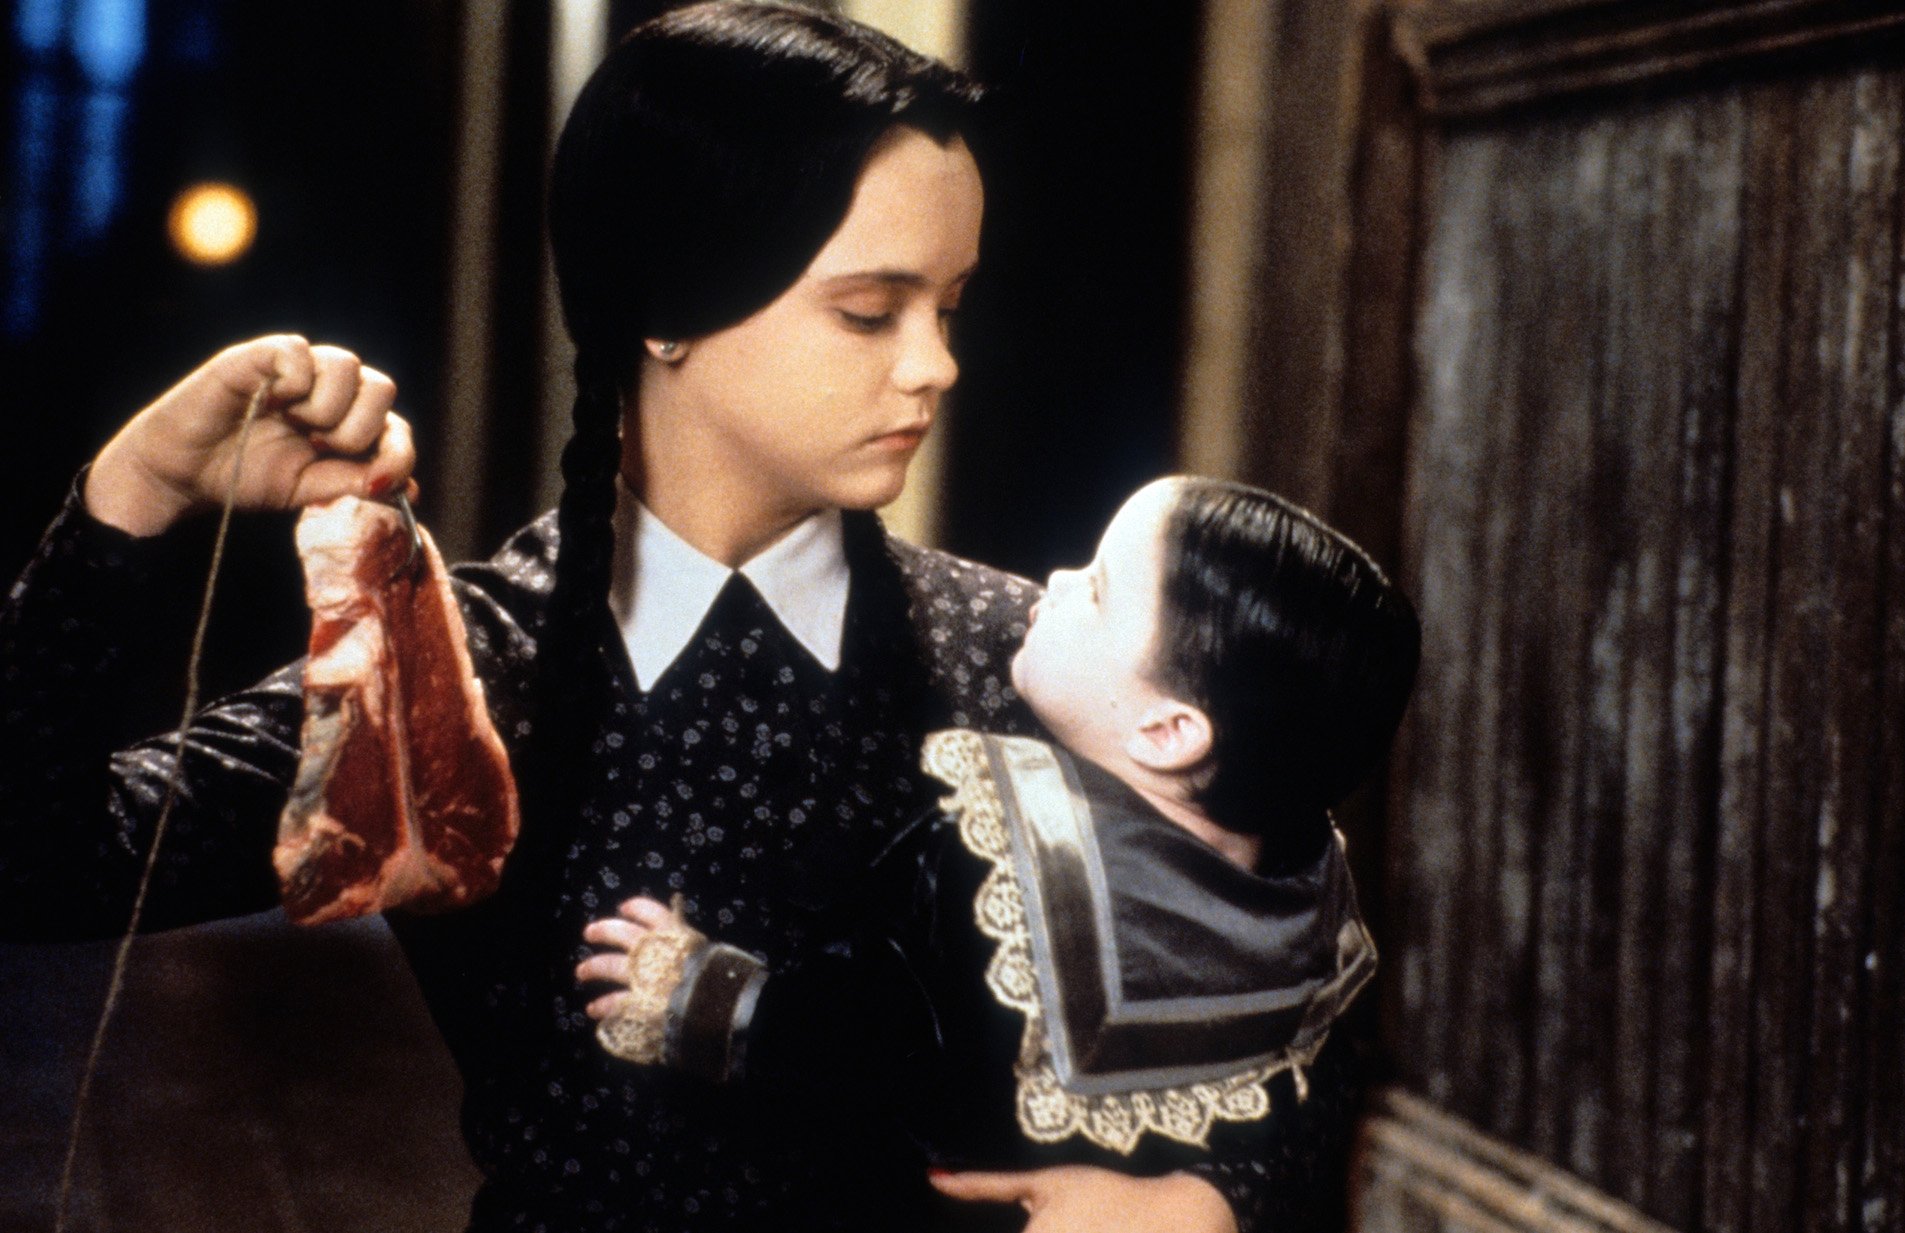 Christina Ricci as Wednesday Addams dangling meat in front of a baby in the movie 'Addams Family Values'